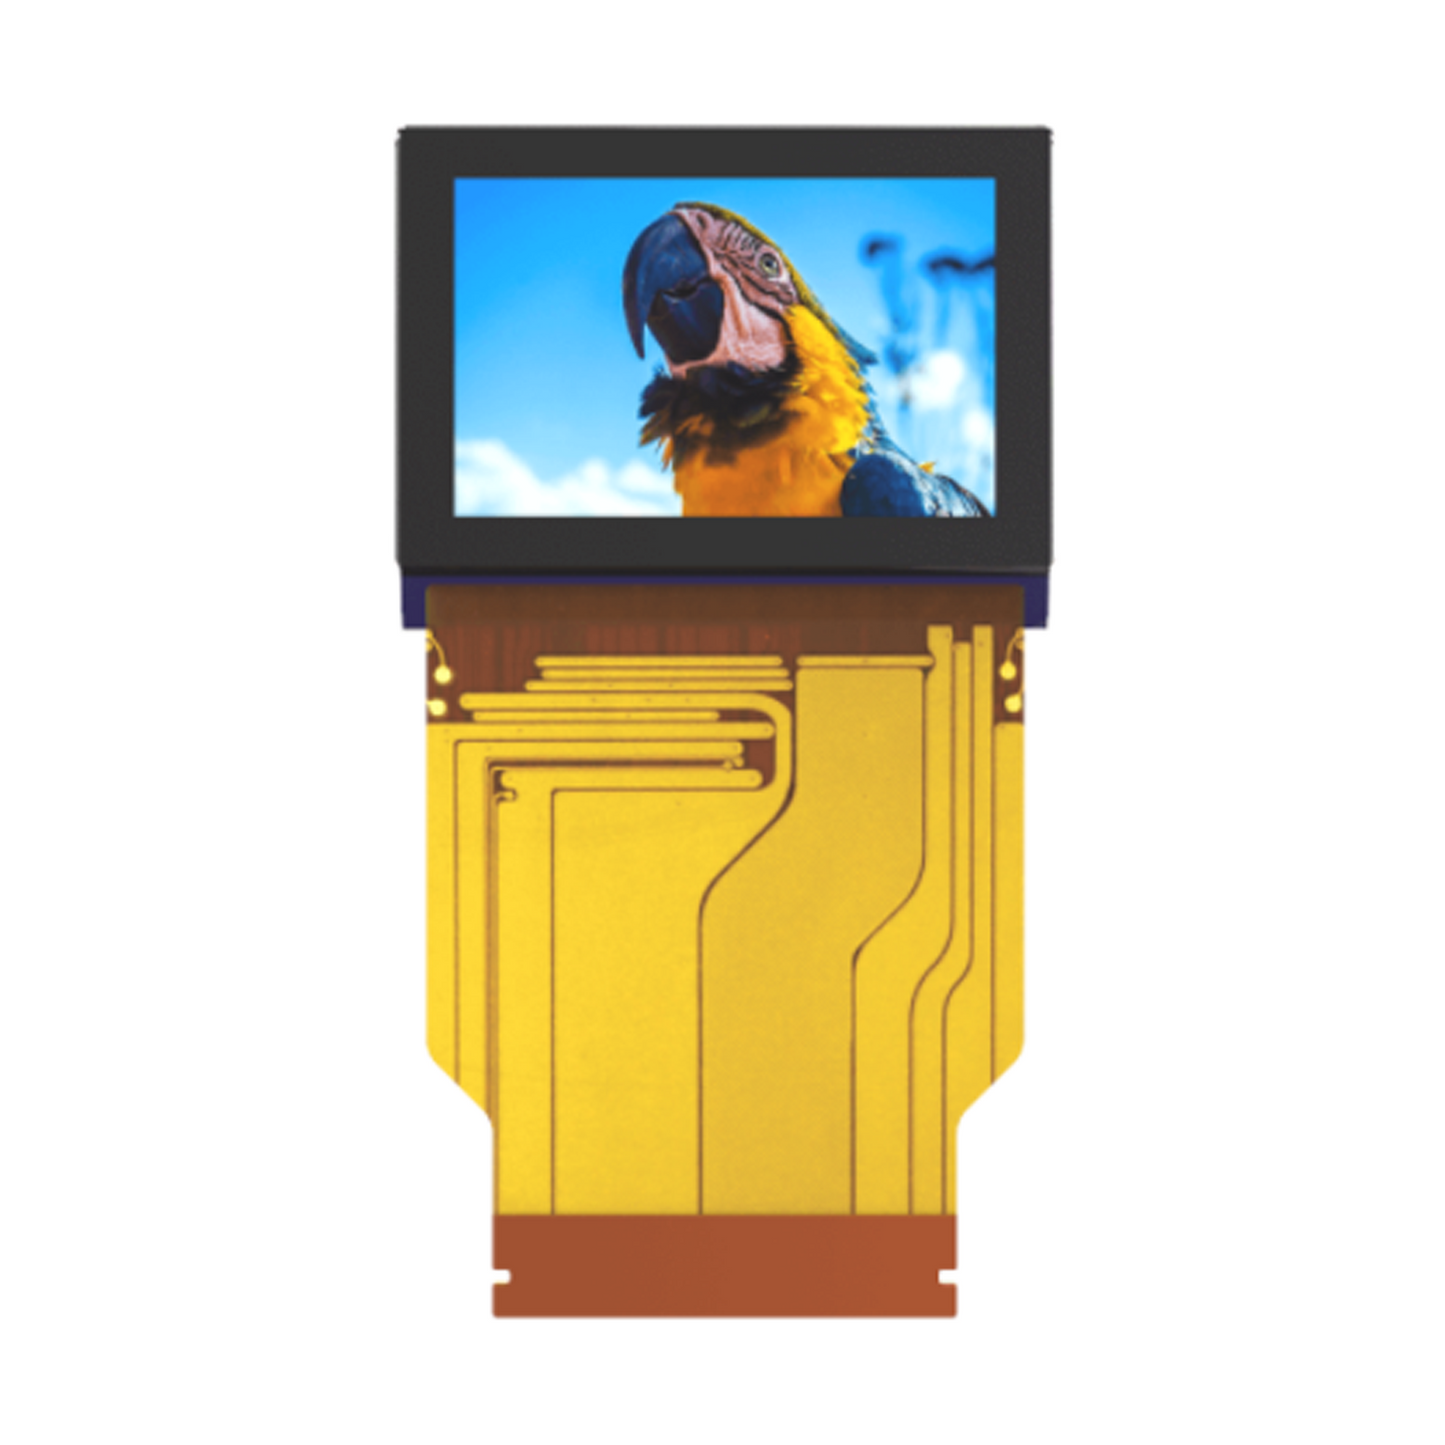 2000nits brightness micro display panel showing a parrot